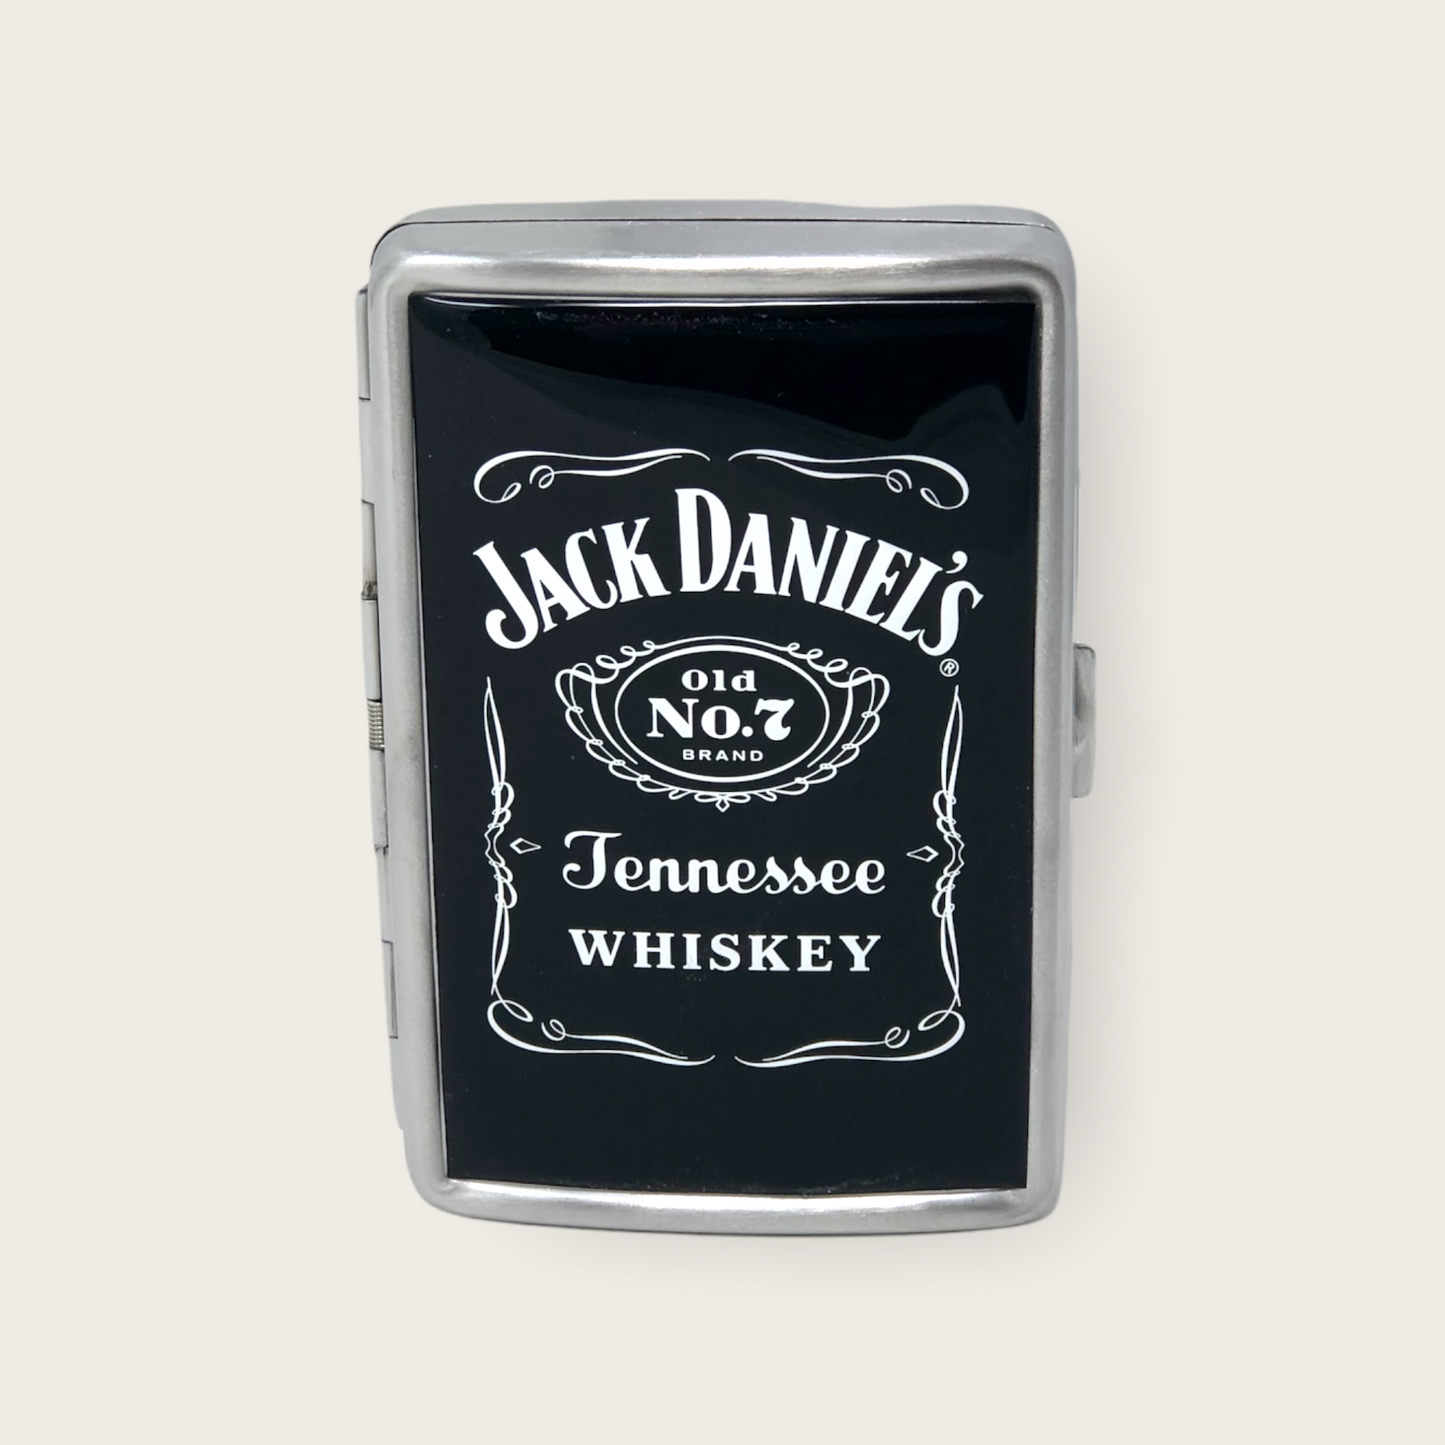 Jack Daniel's Label Logo Carry Case - Stainless Steel - Licensed Product